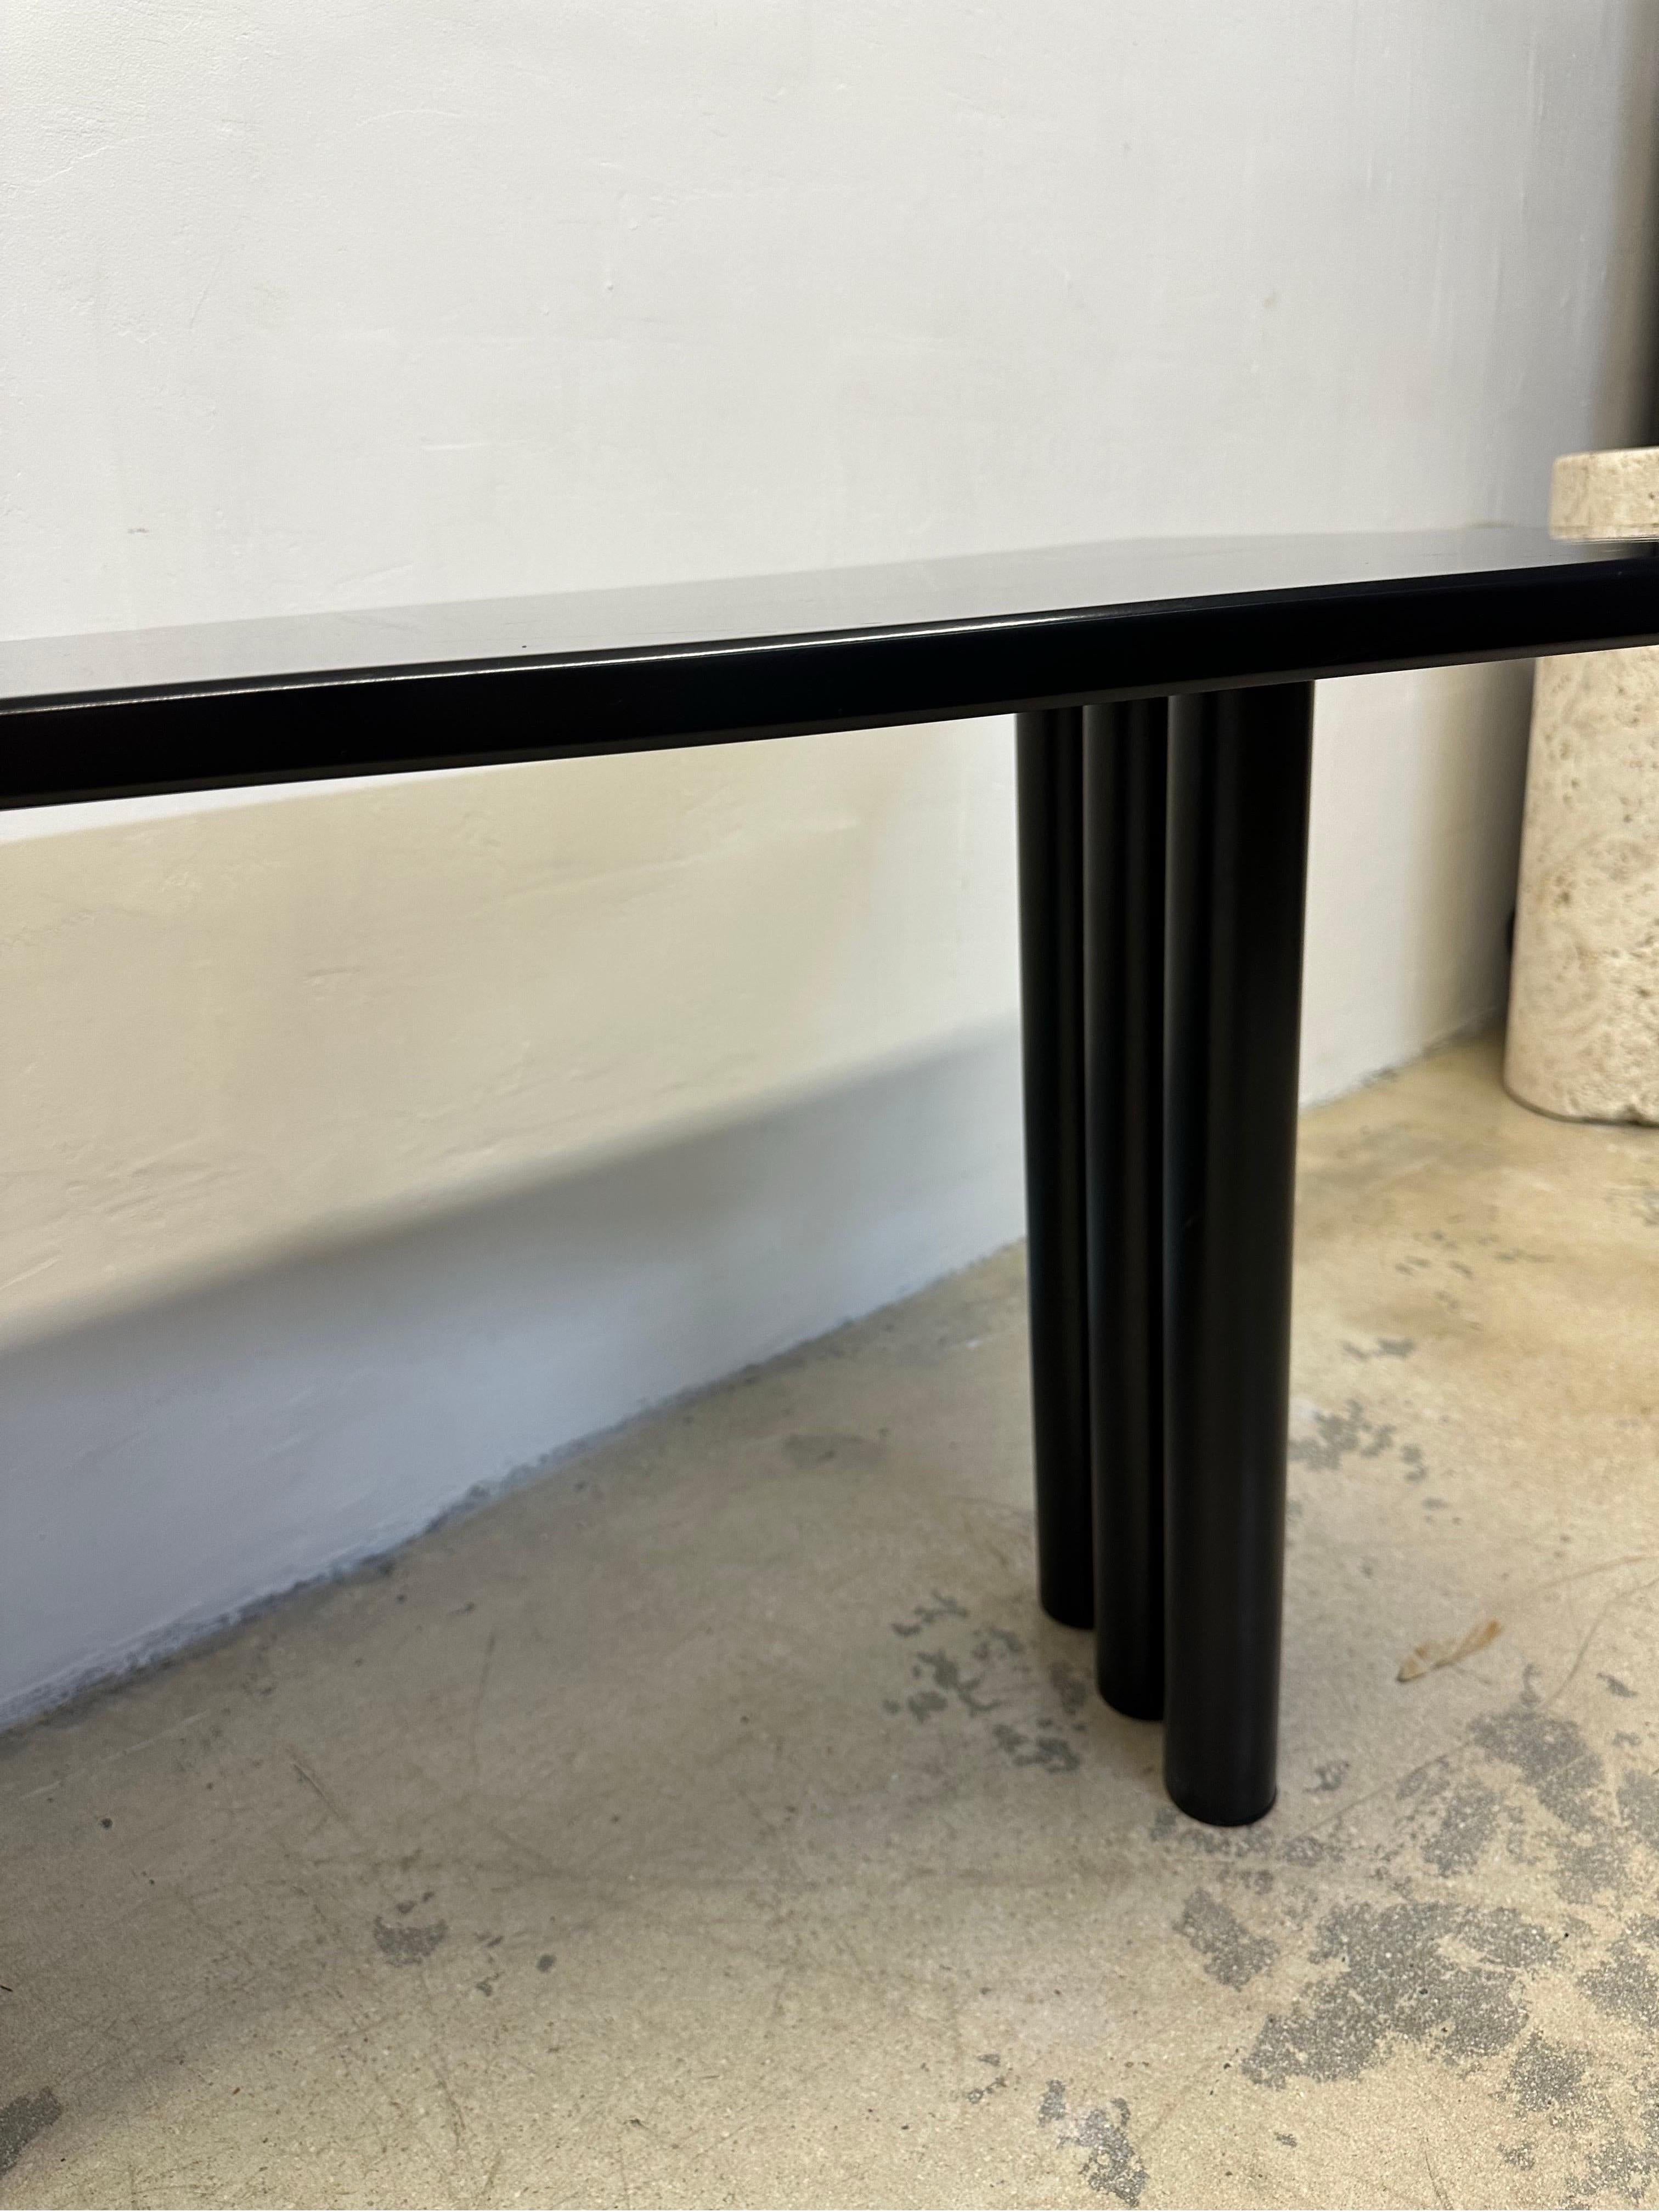 Postmodern Black Lacquered Desk by Interlubke, Germany 1980s For Sale 1